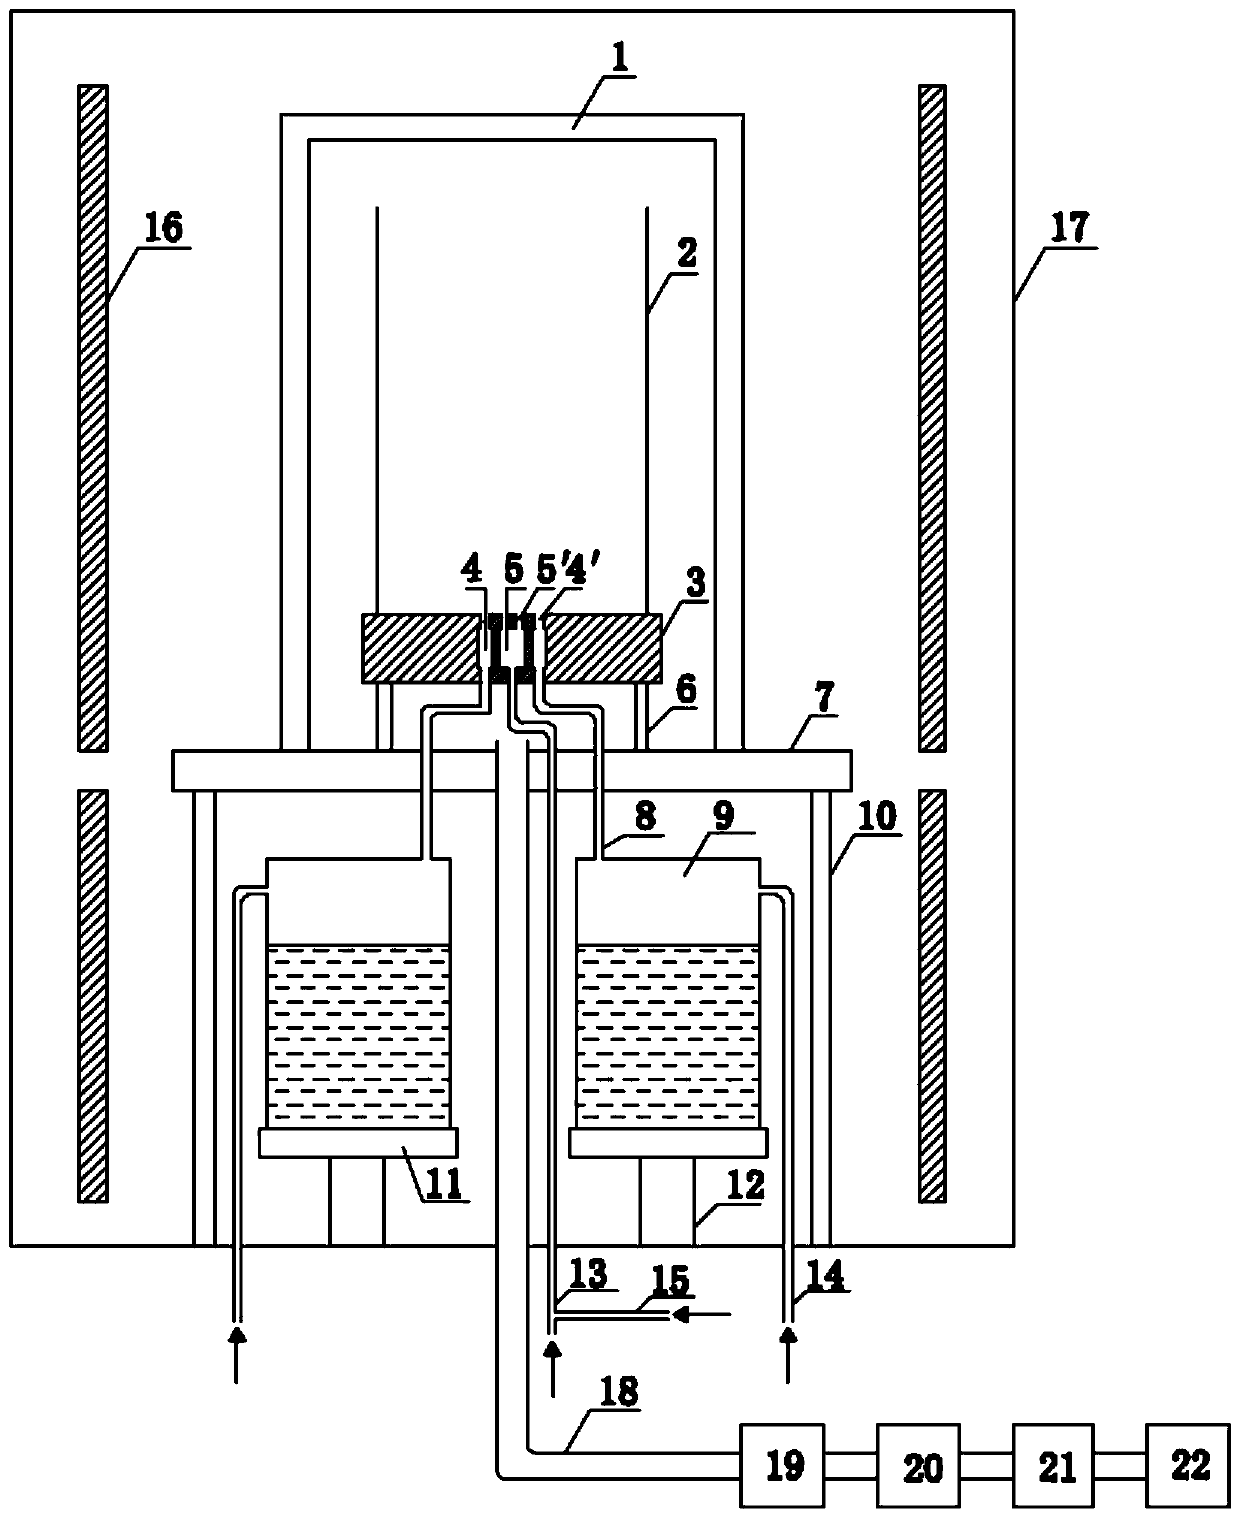 A device for uniformly depositing cvdzns bulk materials on both sides